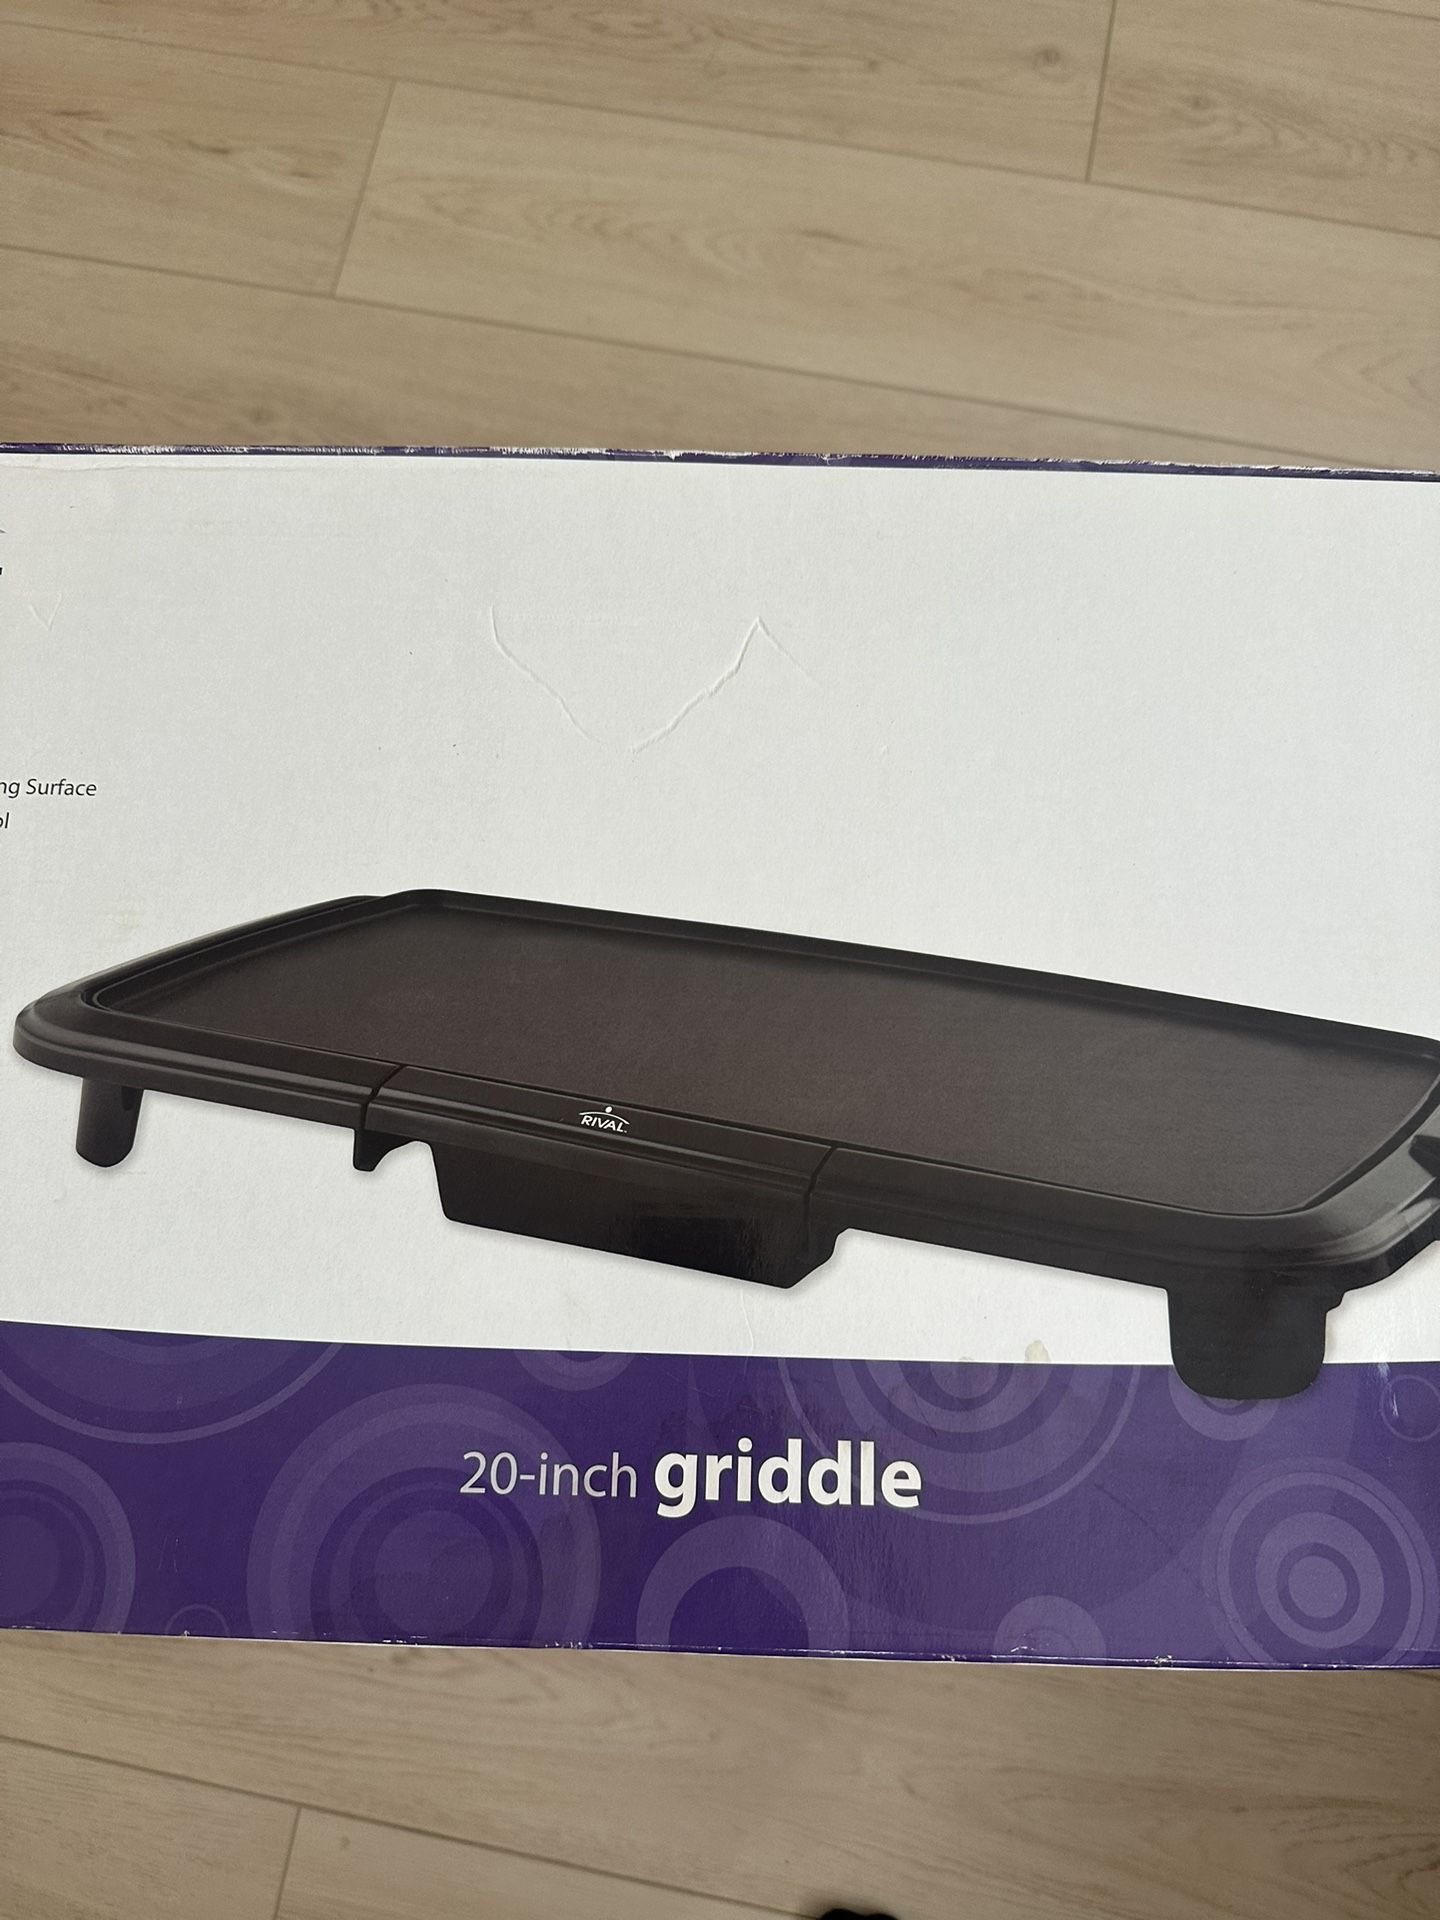 Rival 20 inch griddle for household use